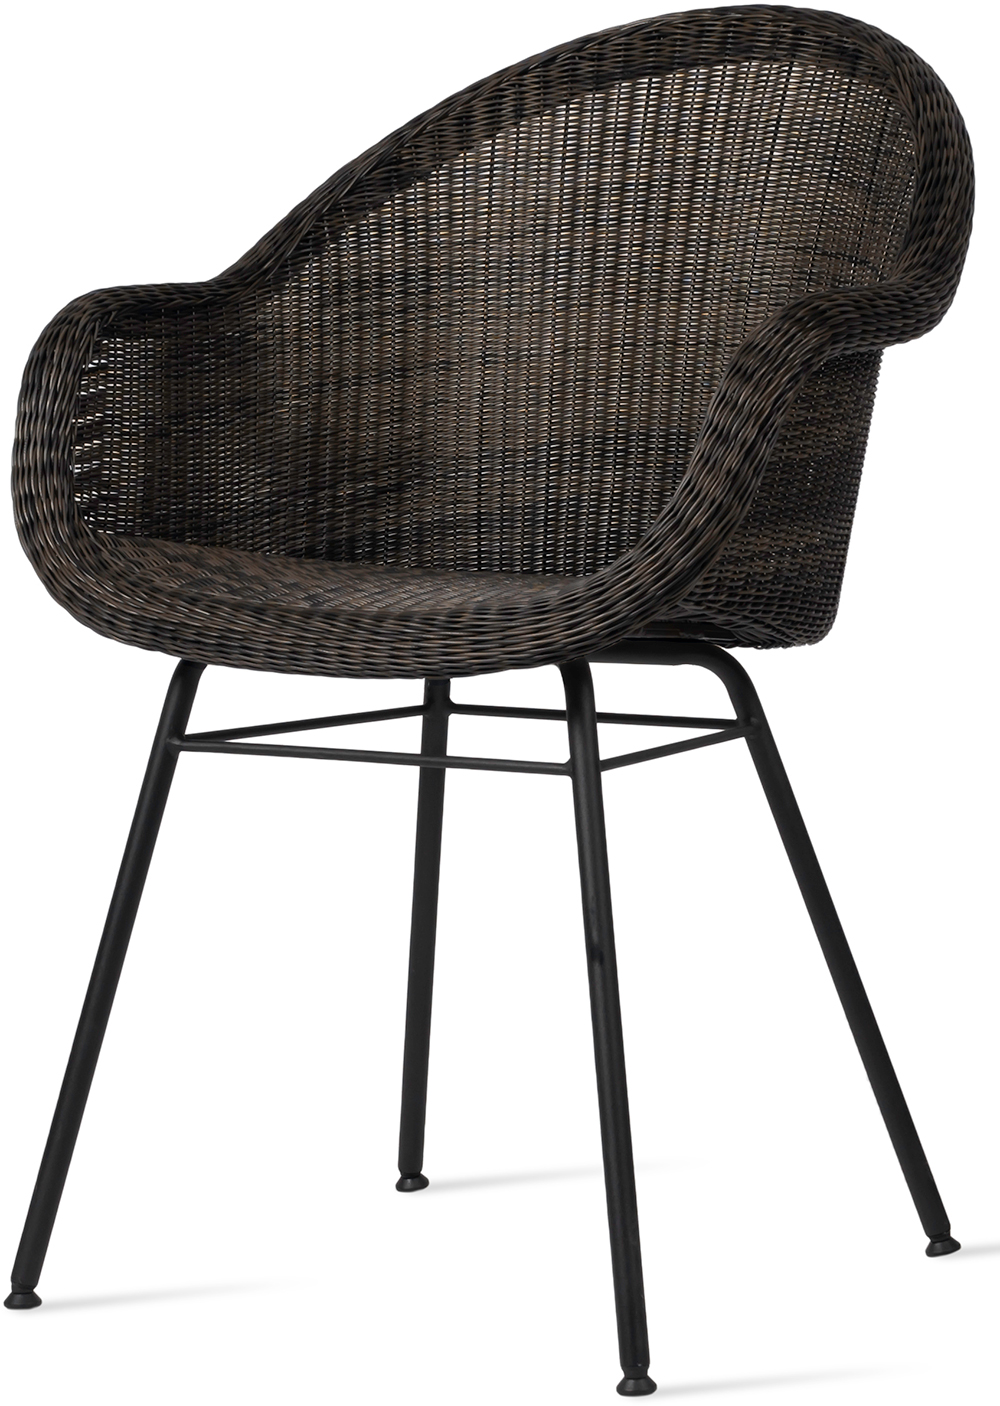 Vincent Sheppard Edgard Dining Chair Steel A Base Mocca